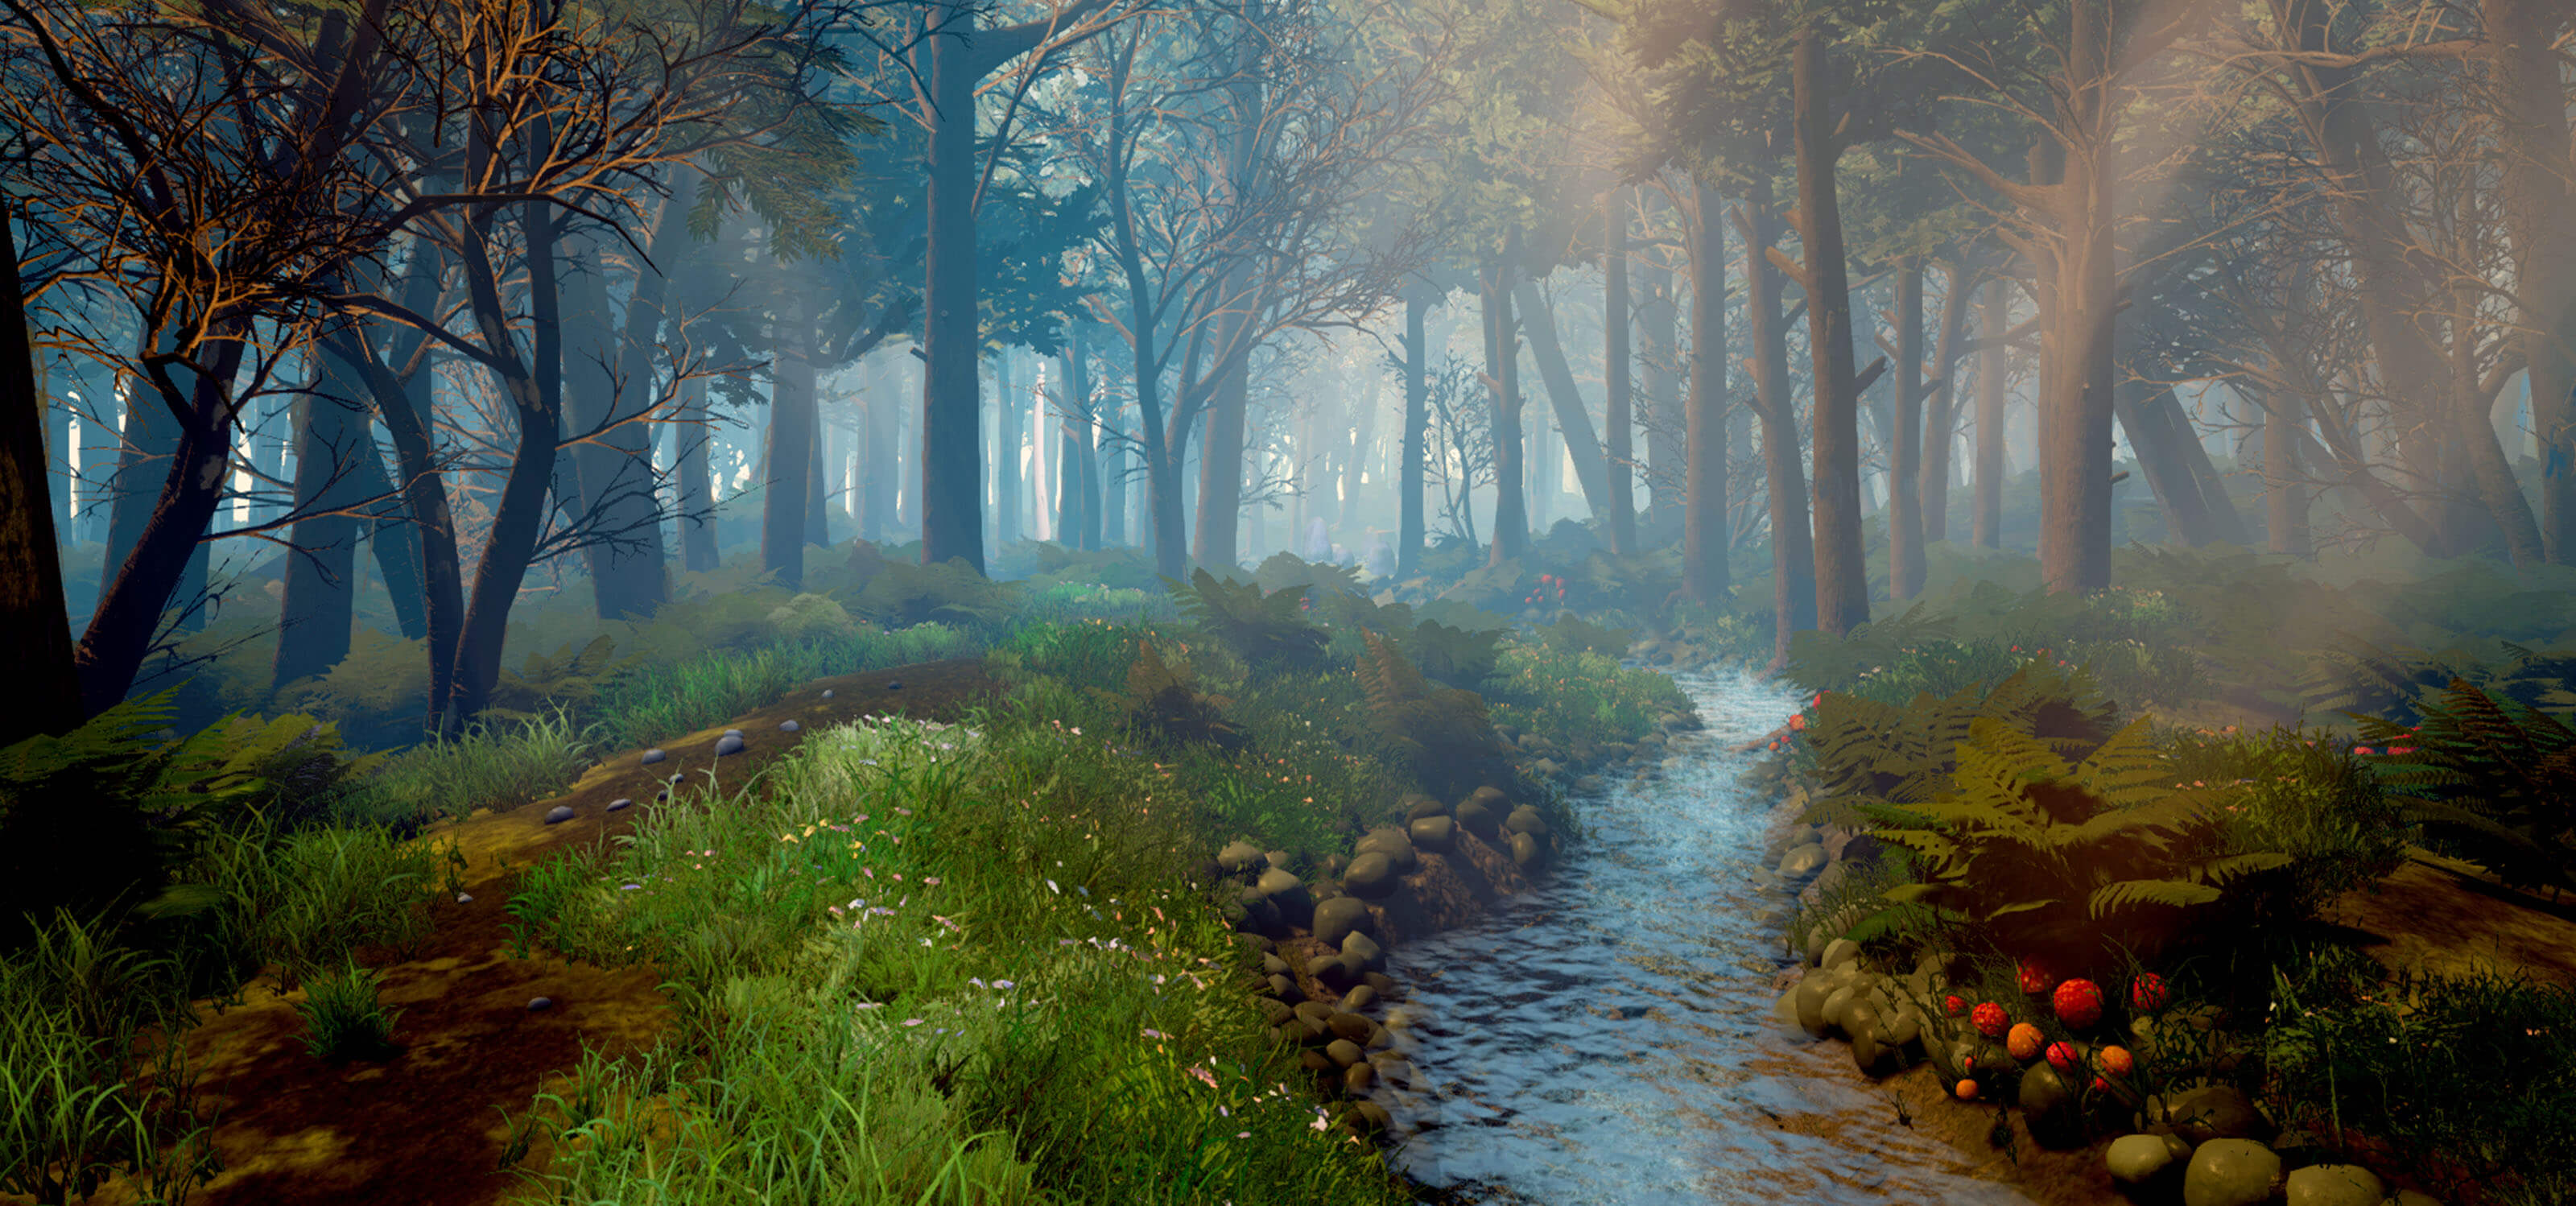 3D model of a stream deep in the forest with beams of sunlight